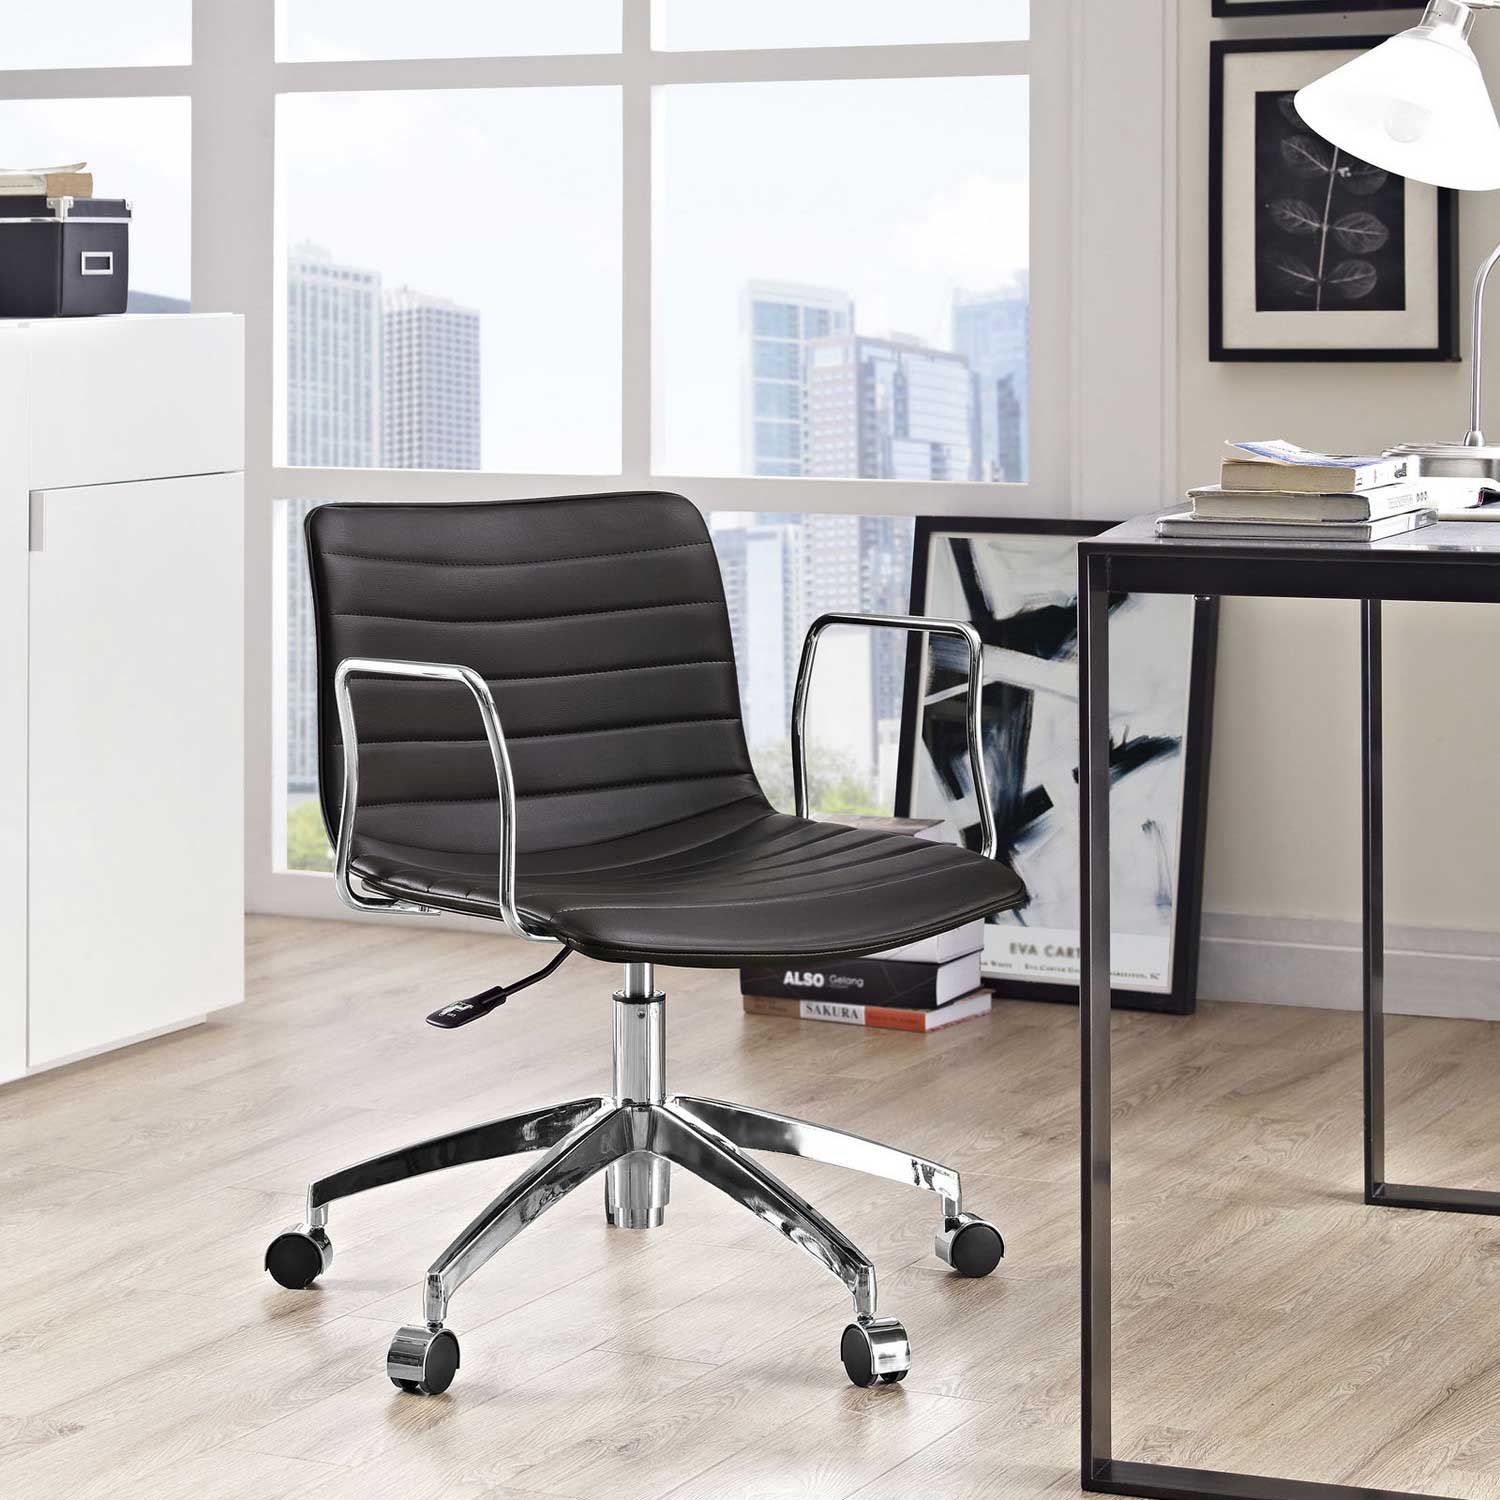 Modway Celerity Office Chair - Brown